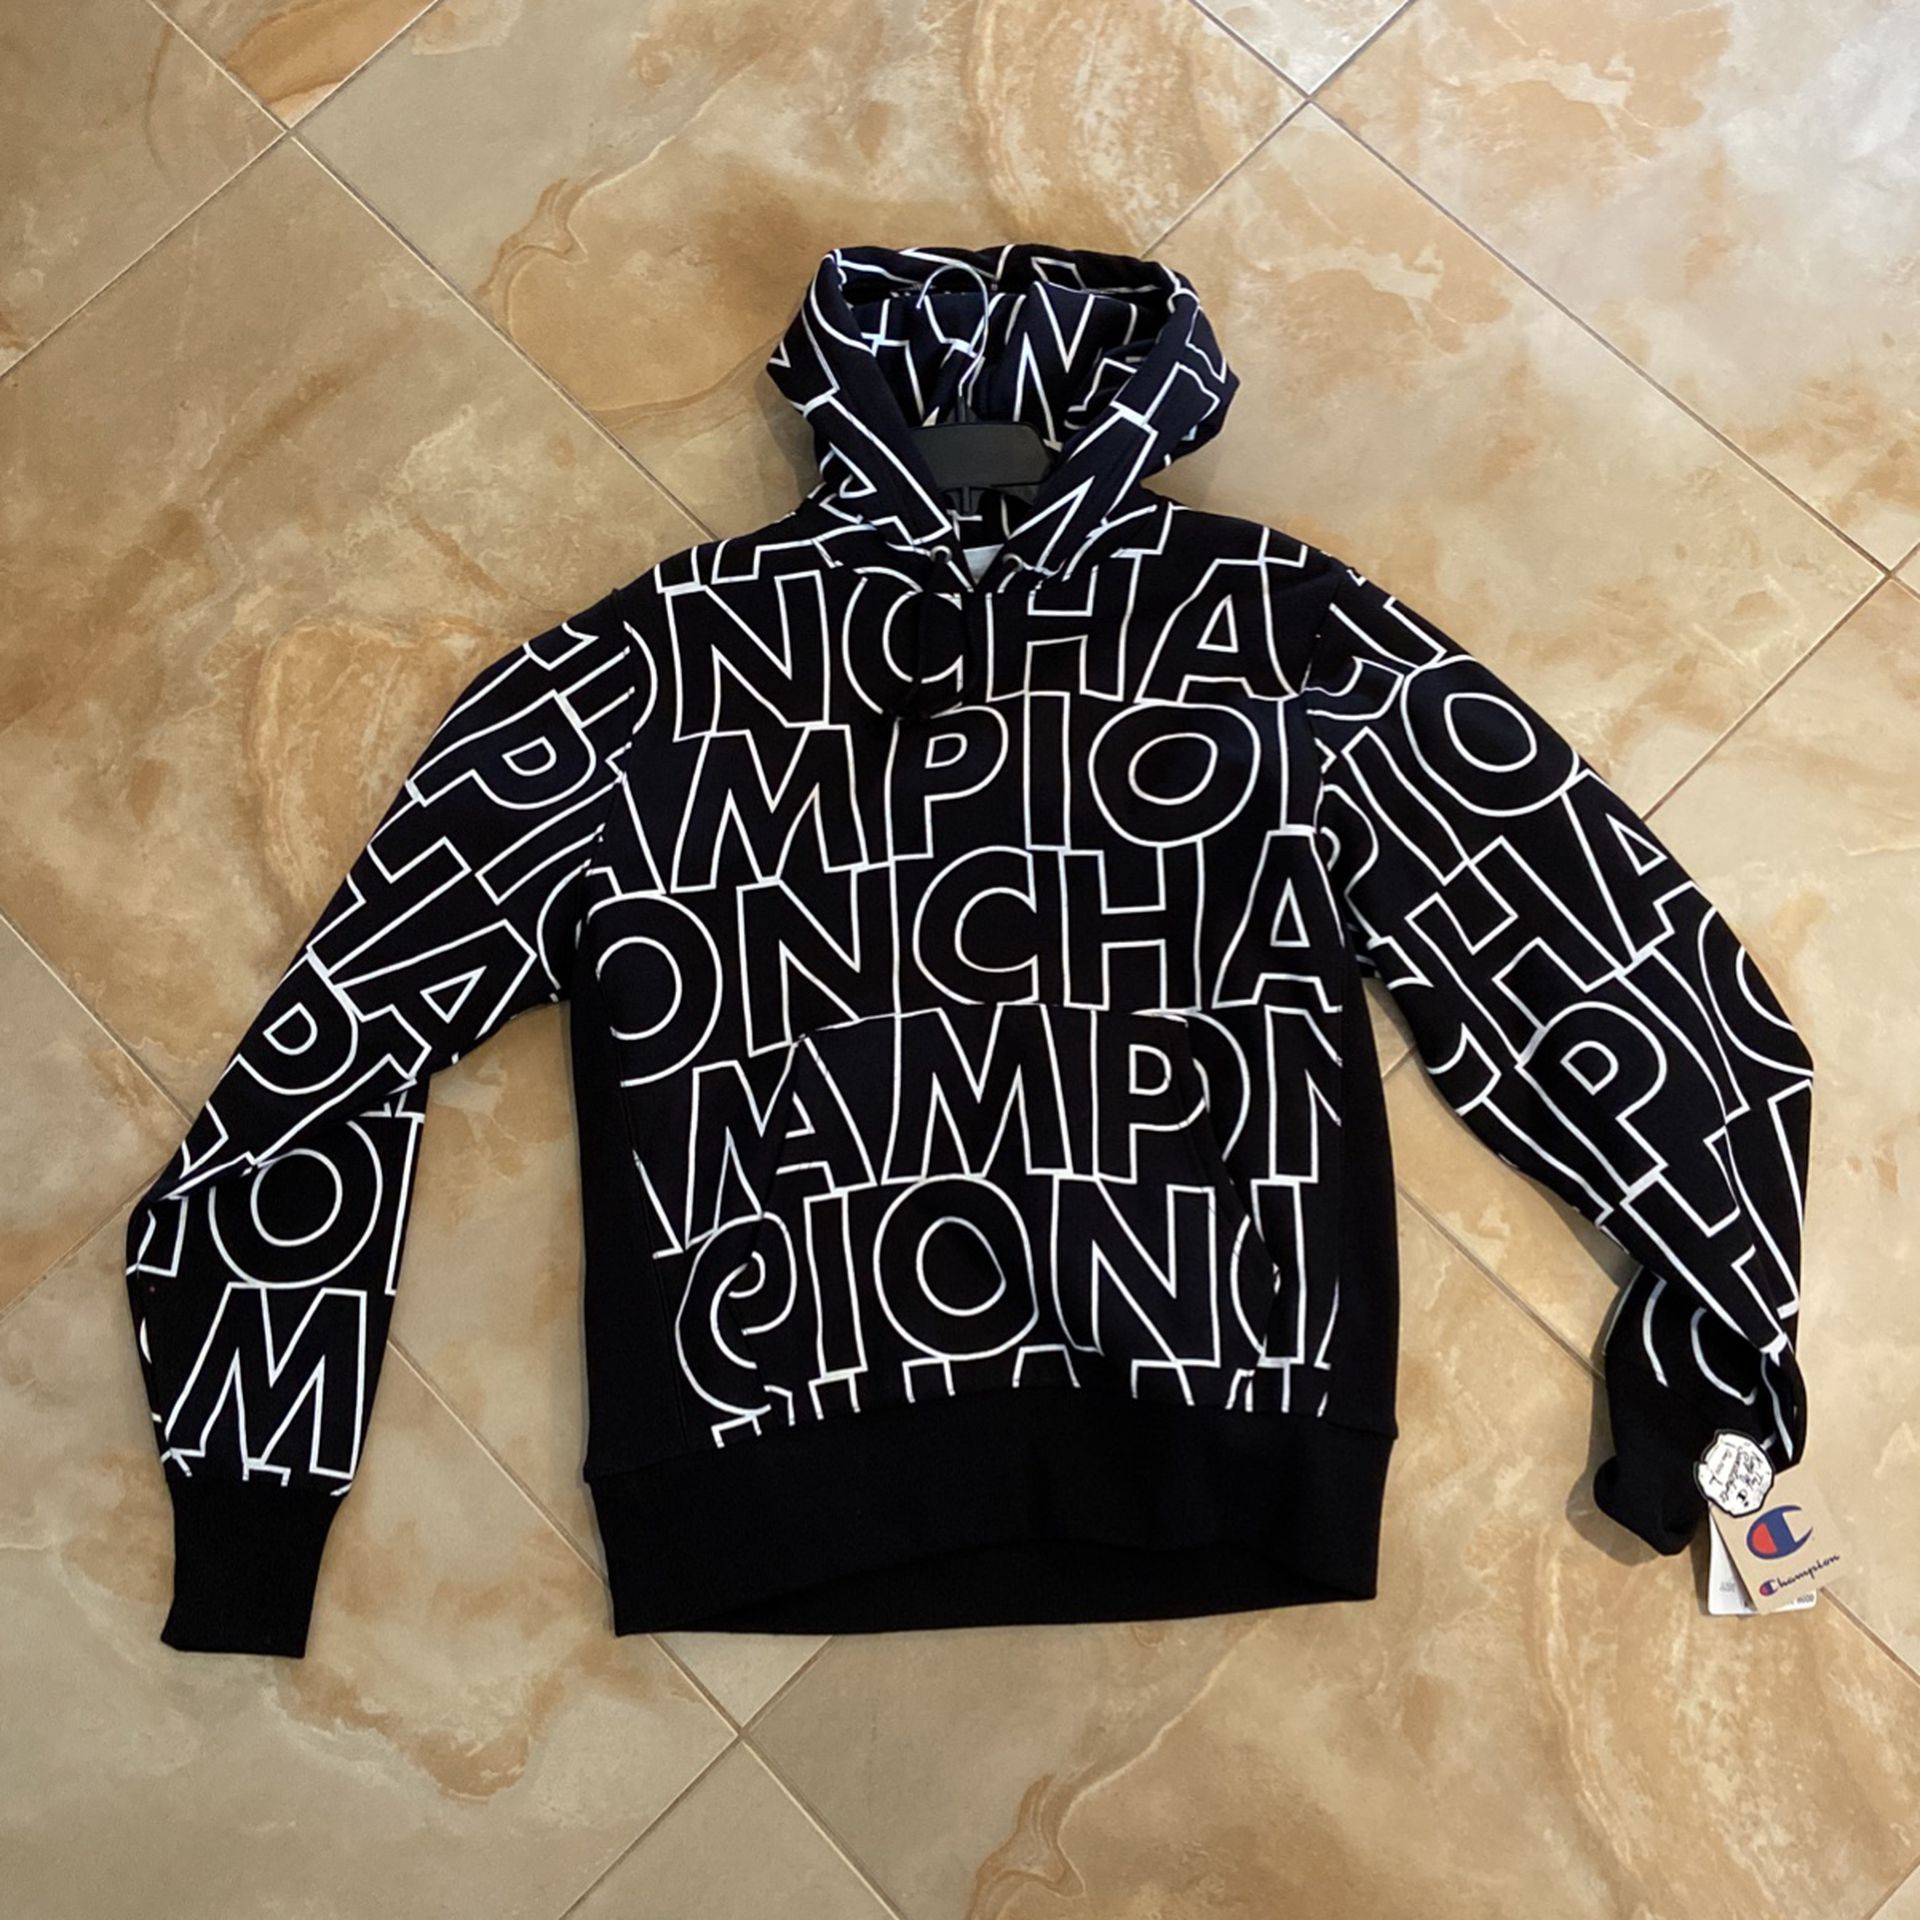 Brand New Champion Hoodie for Sale in Pembroke Pines, FL - OfferUp